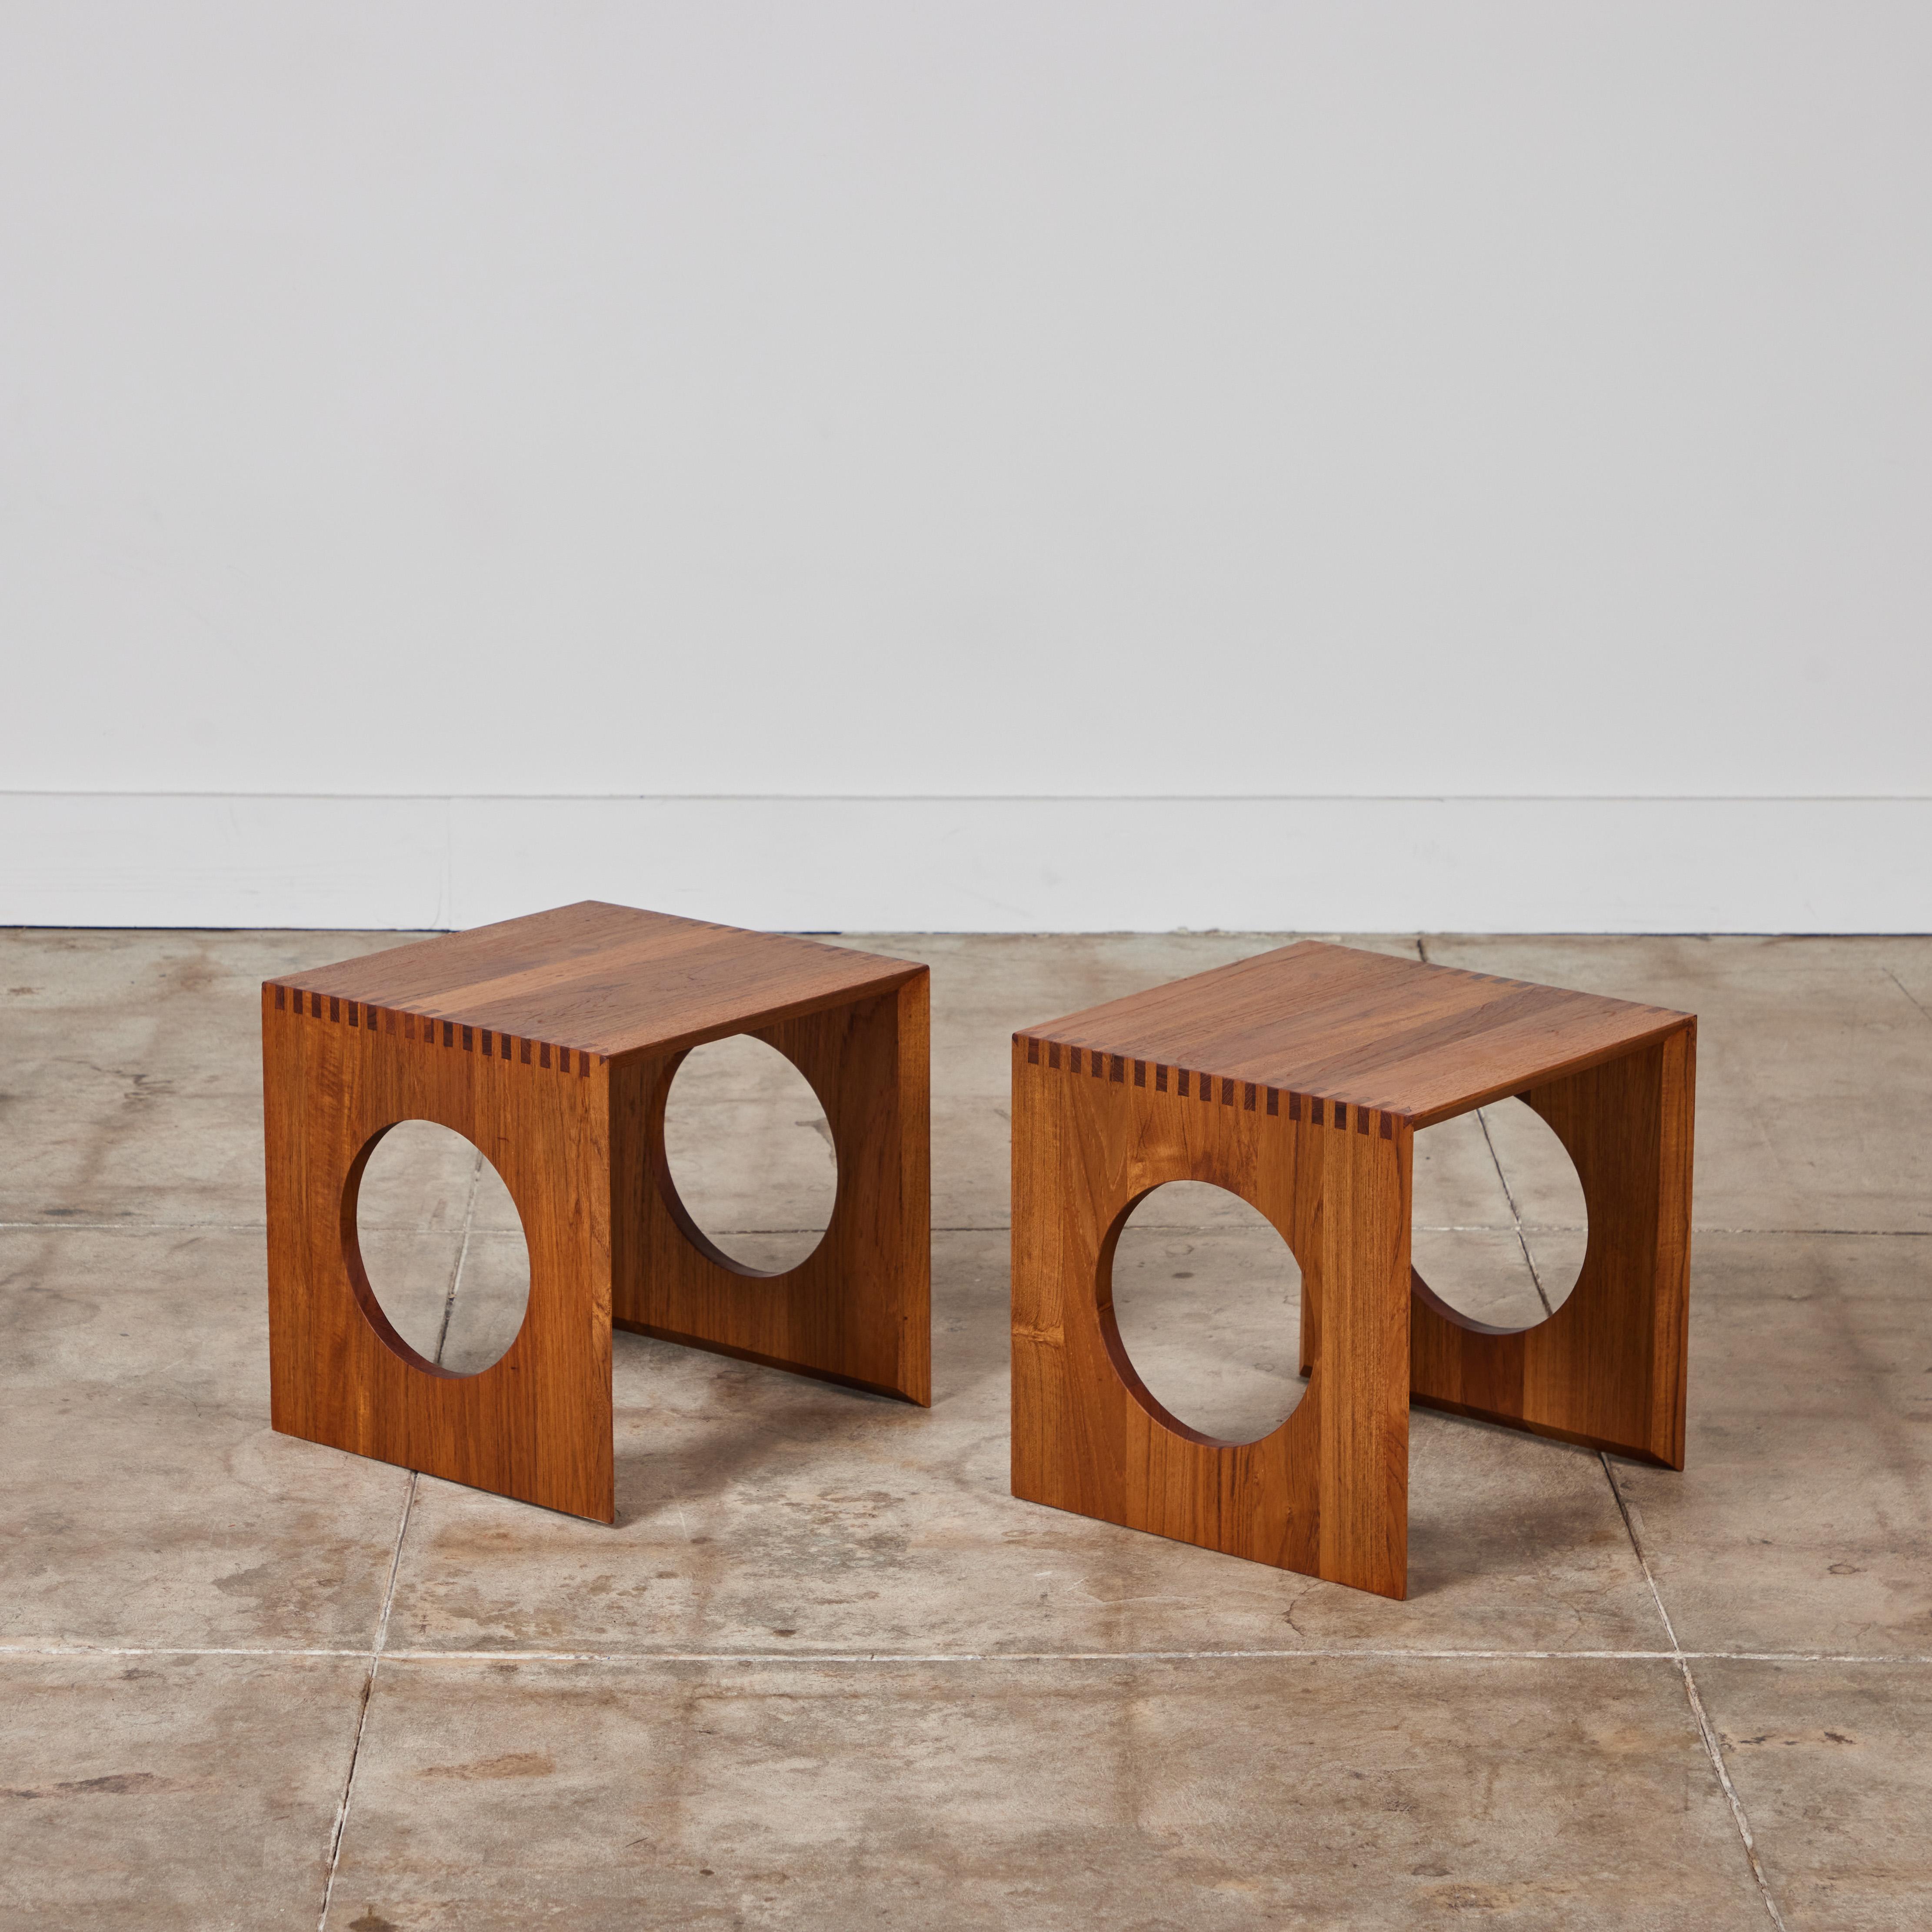 Pair of side tables by Jens H. Quistgaard for Nissen, c.1960s Denmark, features a hand-oiled teak frame with finger joinery and circular cutouts on each side. The tables can interlock forming a single cube table.

Dimensions
14.25